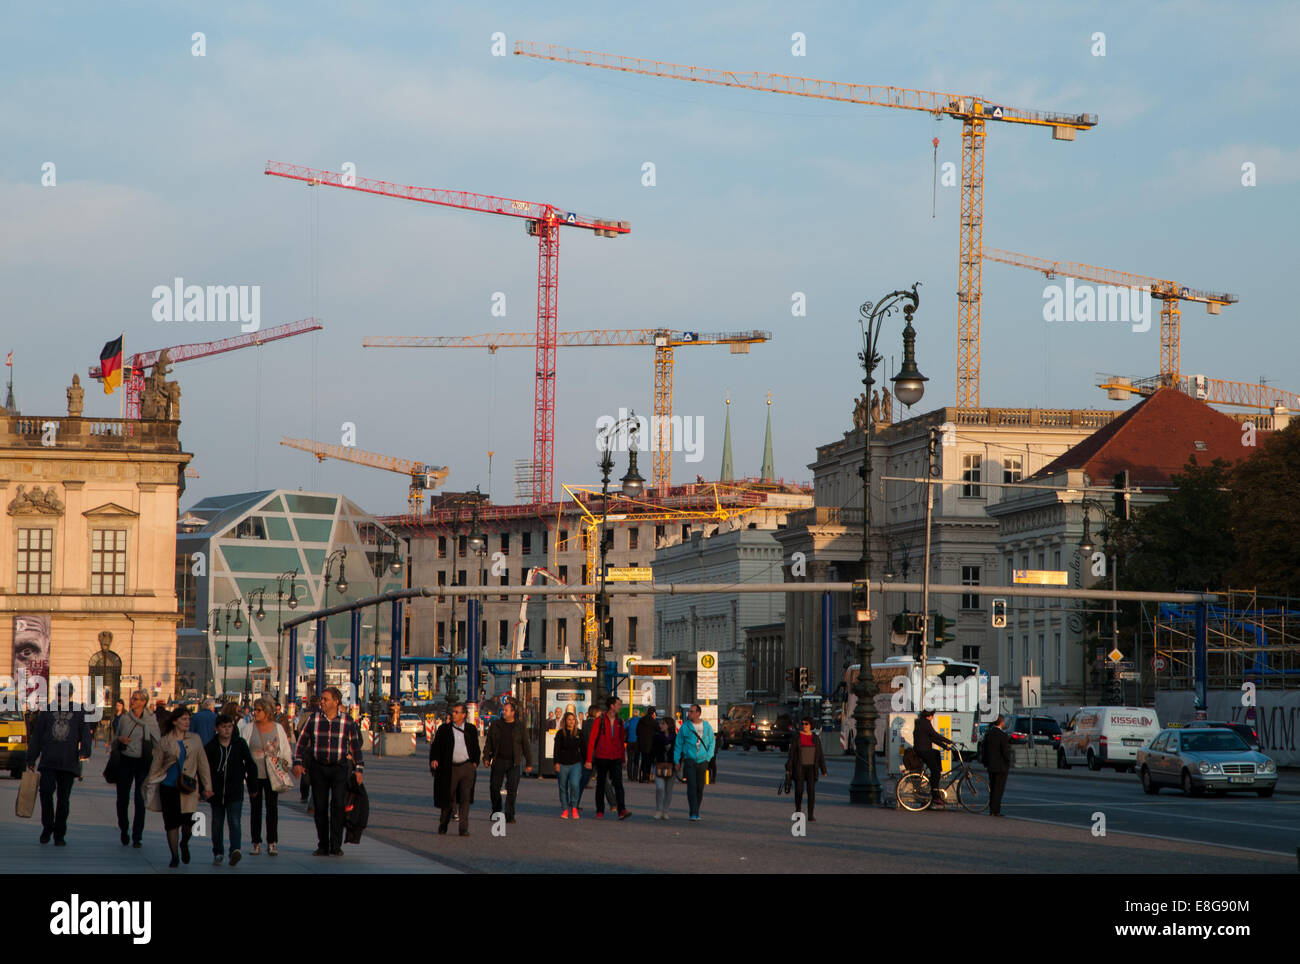 Crowds of tourists on Berlin Unter den Linden boulevard, forest of cranes in central Berlin Stock Photo